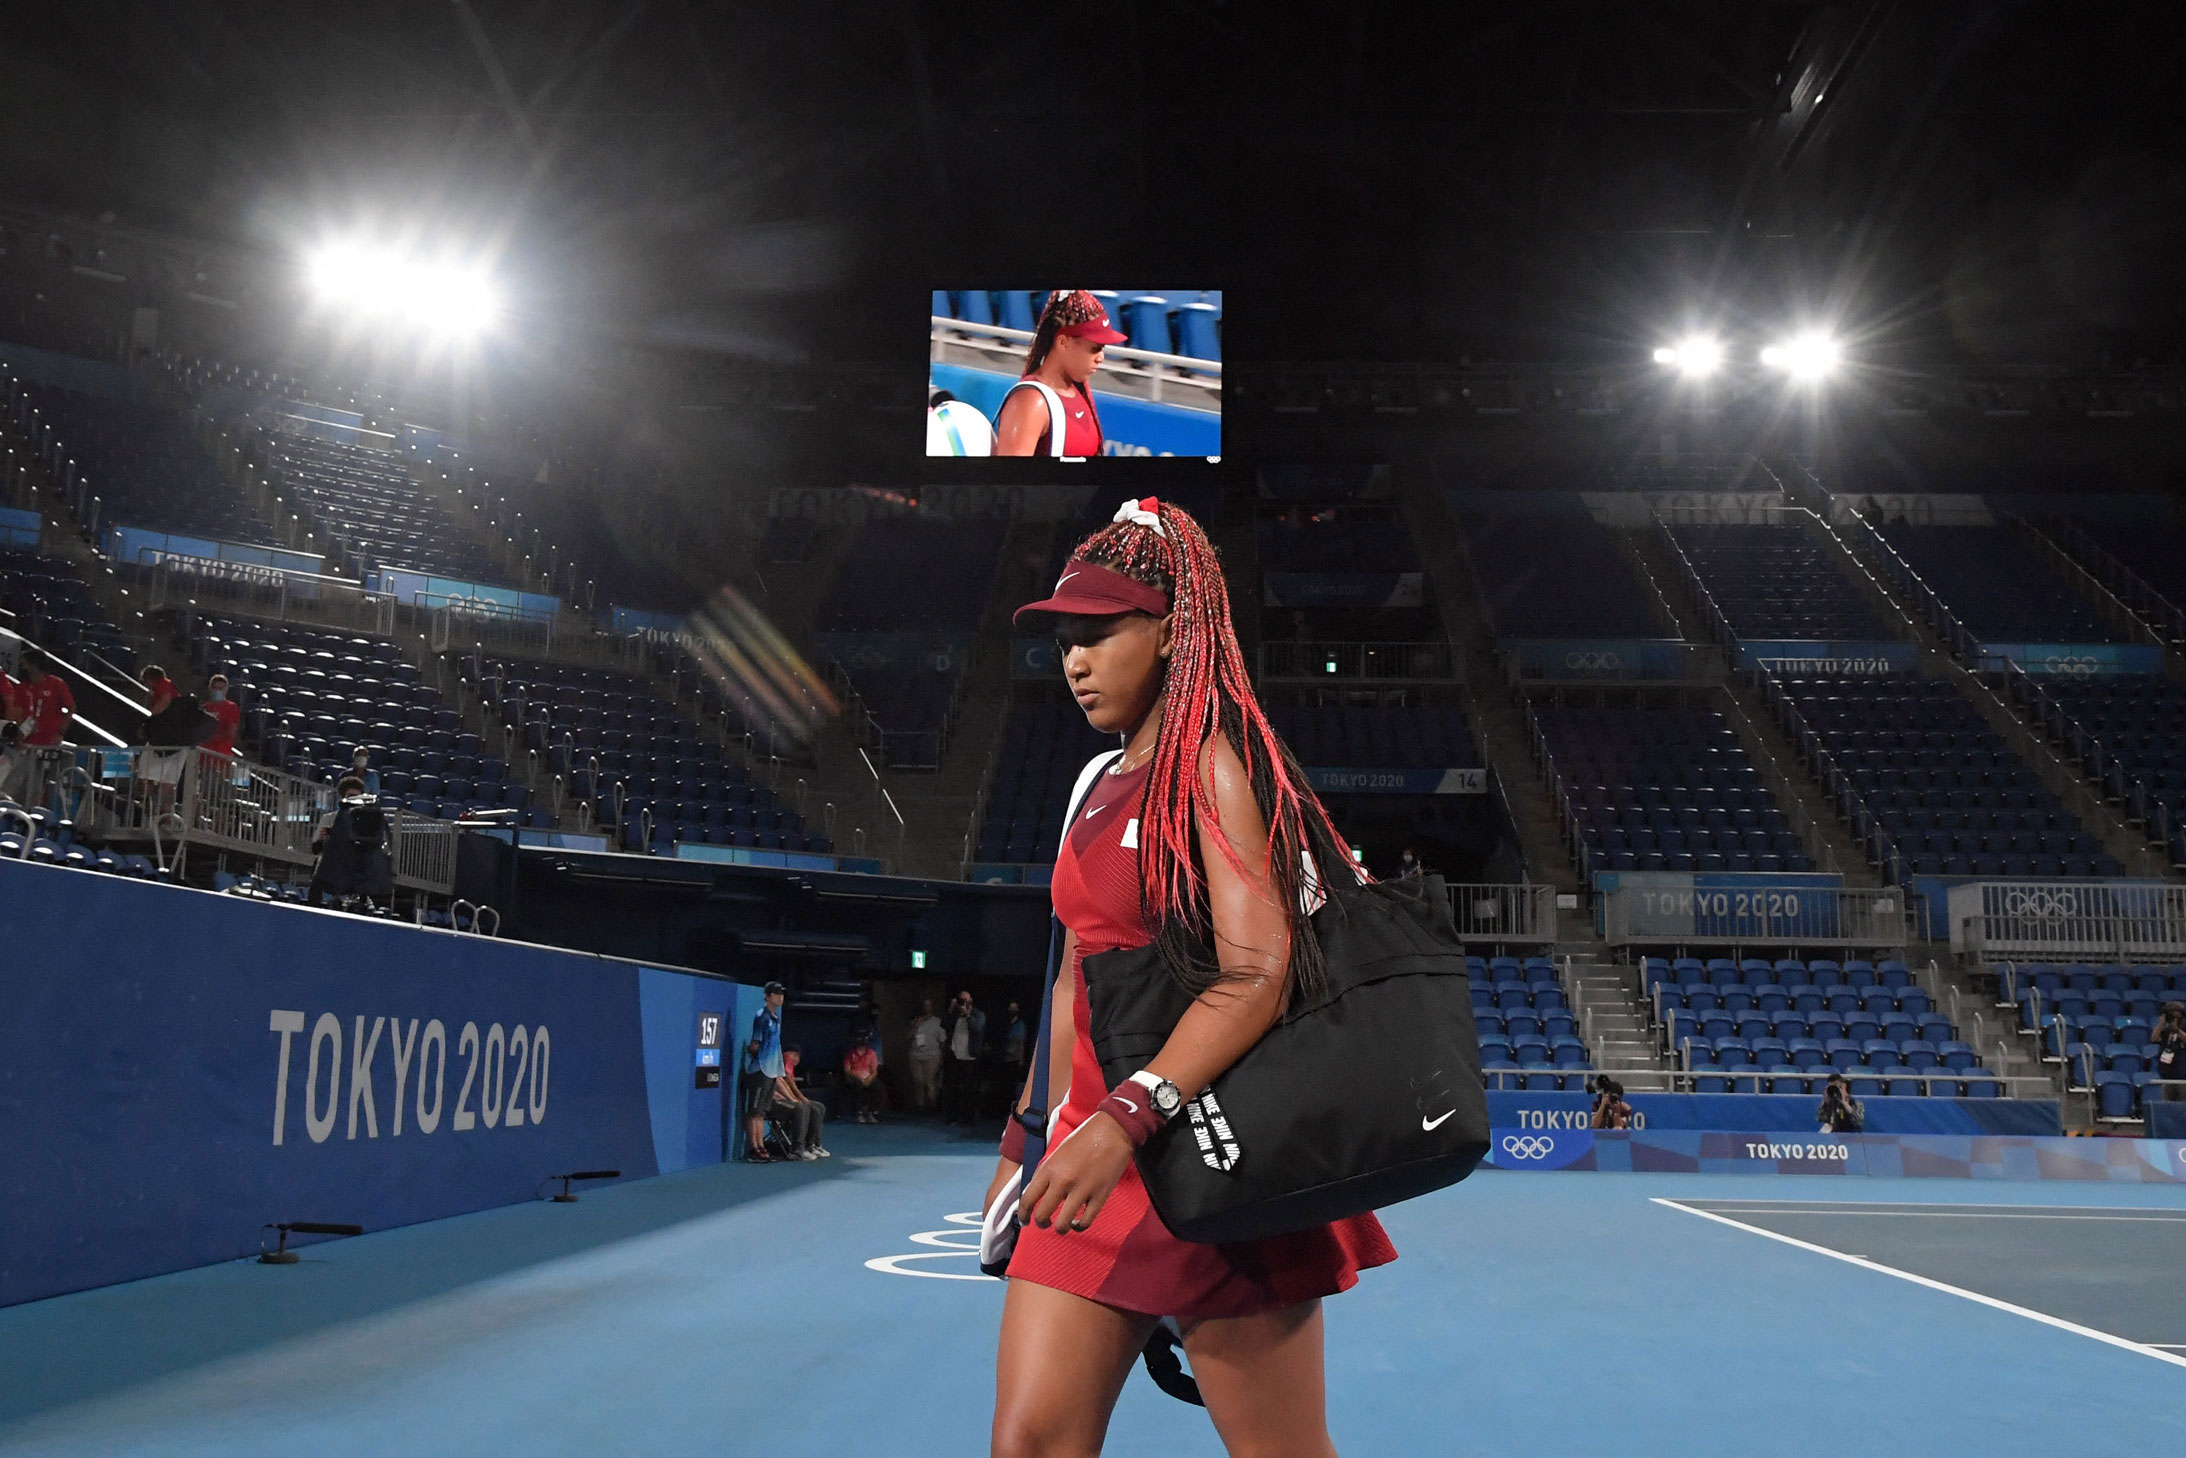 Japan's Naomi Osaka leaves the court after being defeated by Czech Republic's Marketa Vondrousova on July 27.